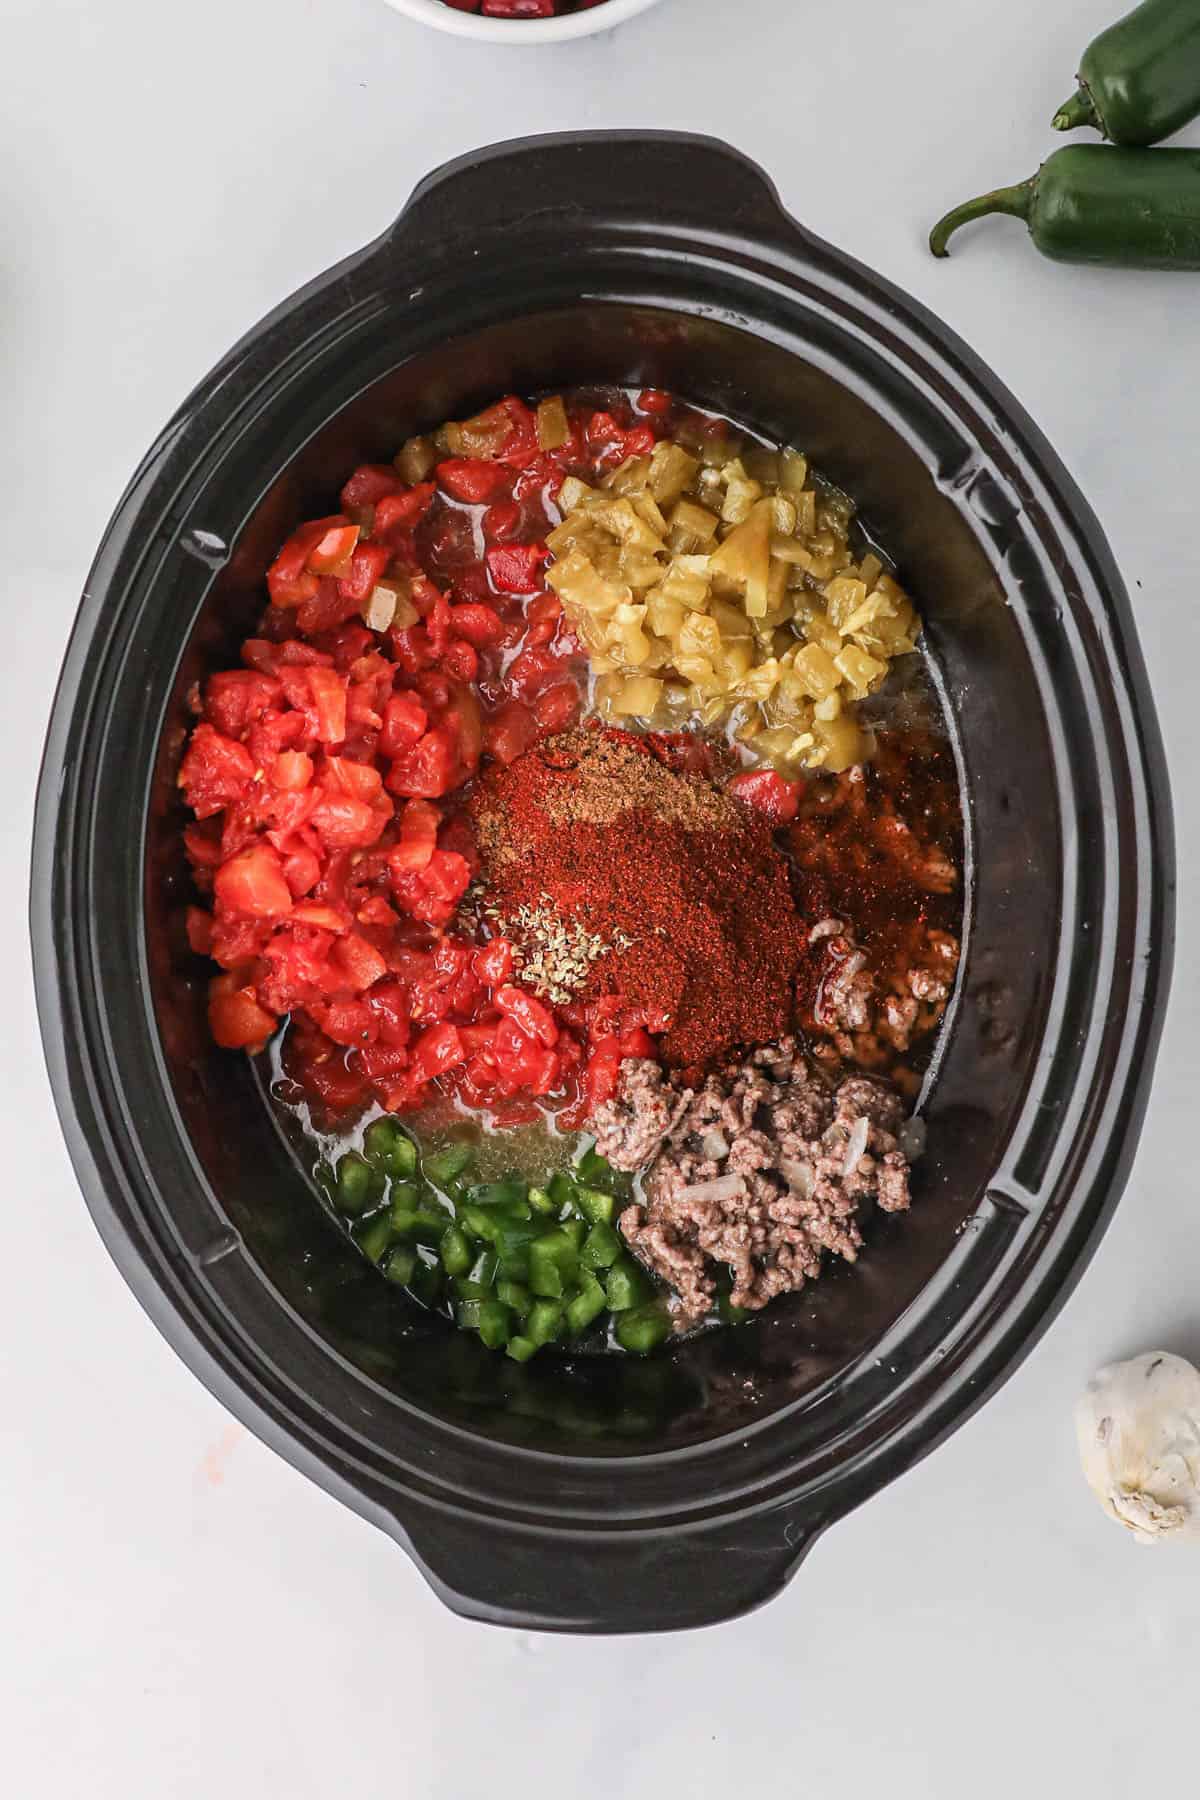 Taco soup ingredients added to a black crockpot.